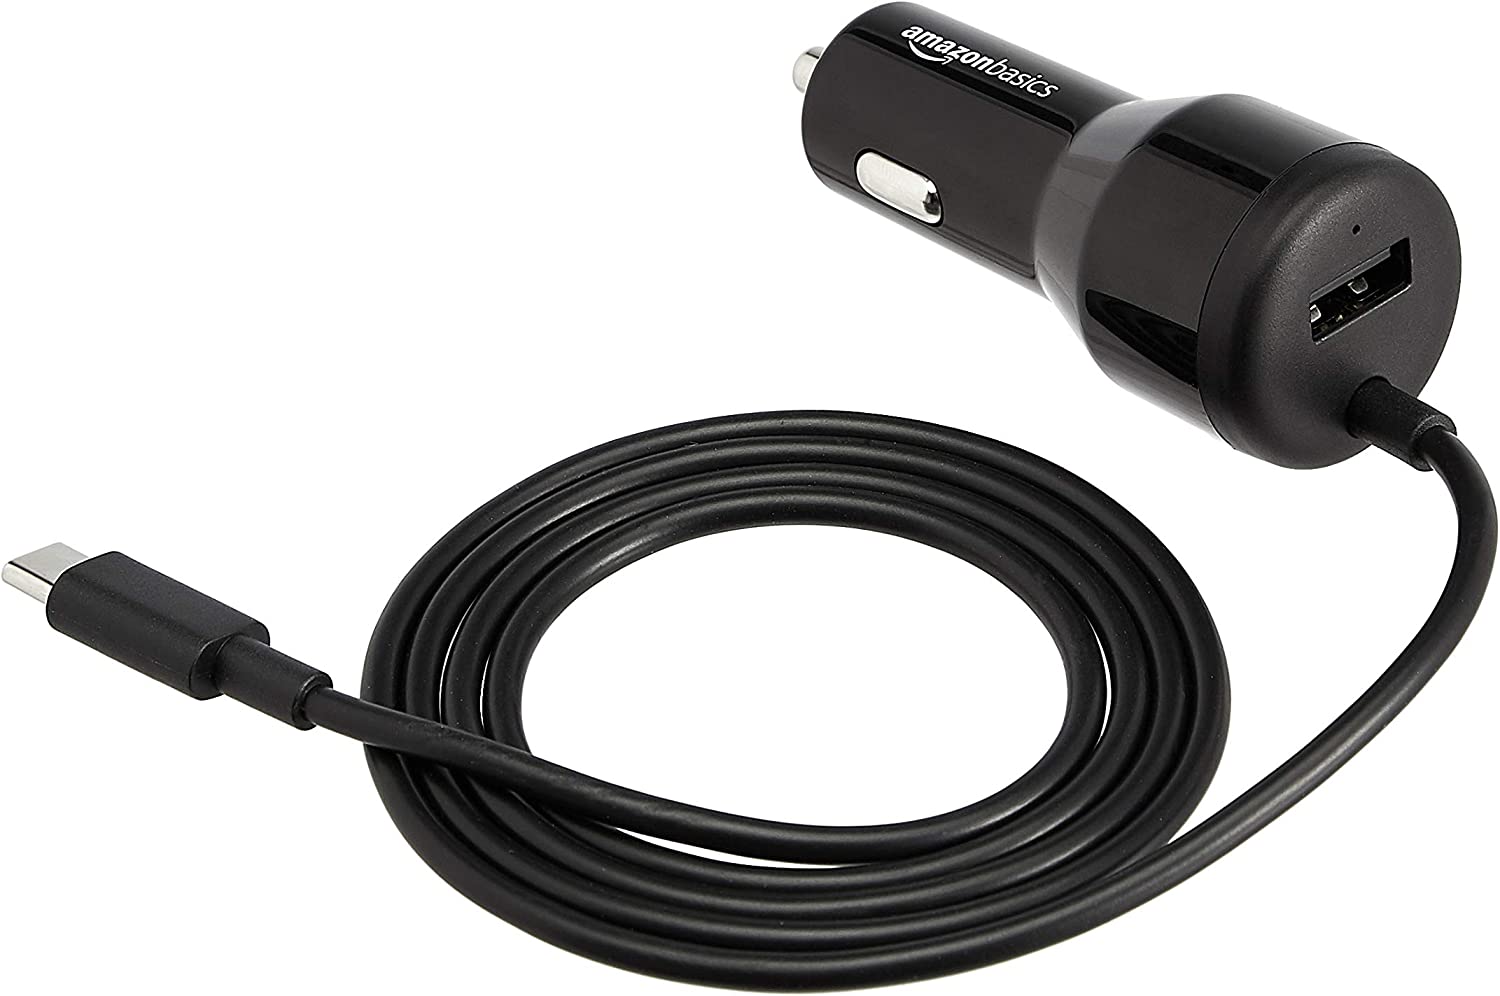 Amazon Basics USB-C Car Charger with 18W USB-C Cable and 12W USB-A Port. -(NC)